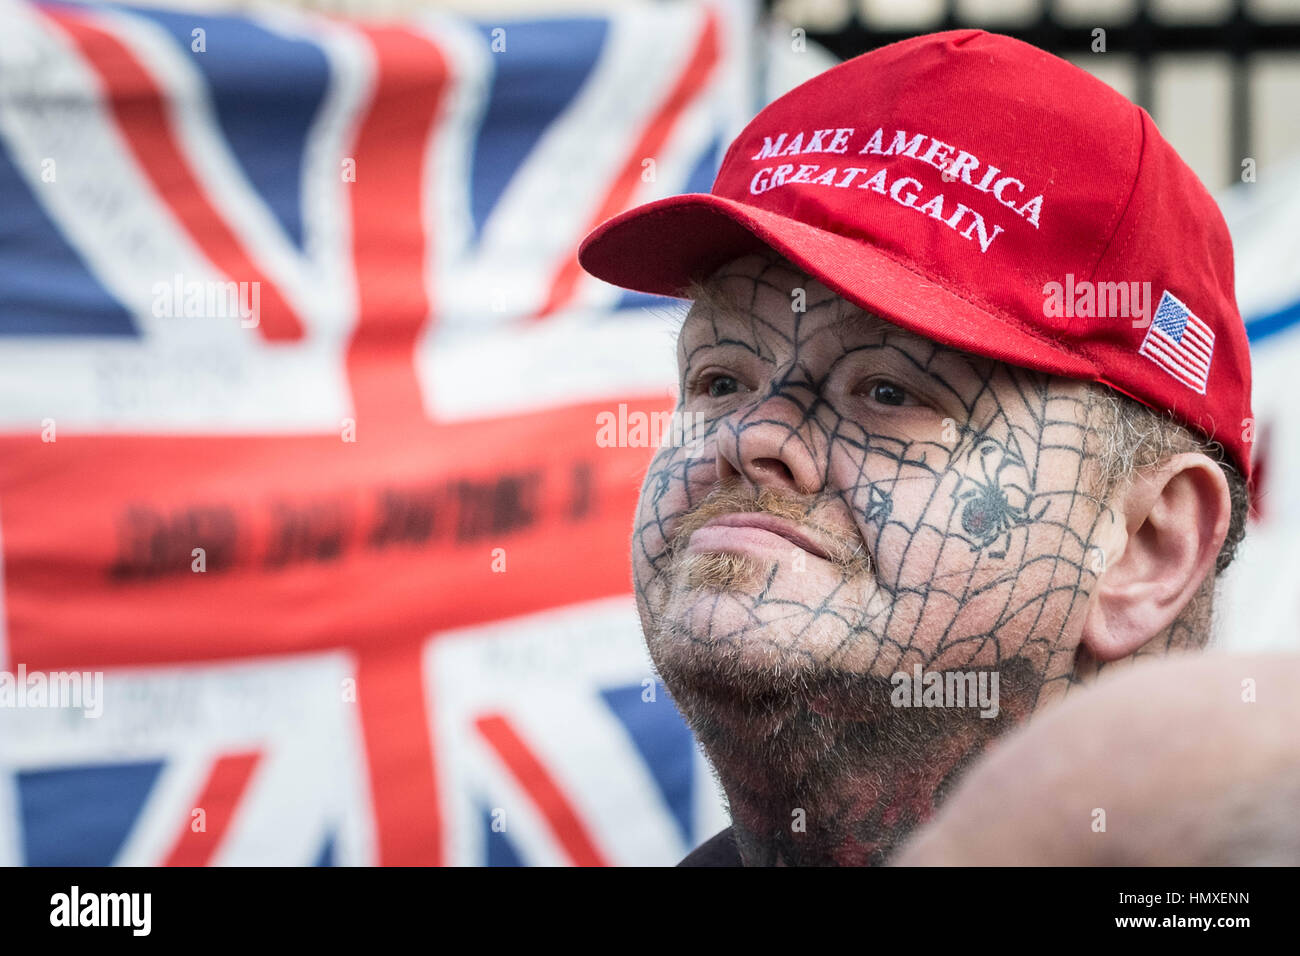 London, UK. 6th February, 2017. A Trump supporter joins the pro-Israeli supporters welcoming Prime Minister of Israel Benjamin Netanyahu’s visit to Downing Street © Guy Corbishley/Alamy Live News Stock Photo